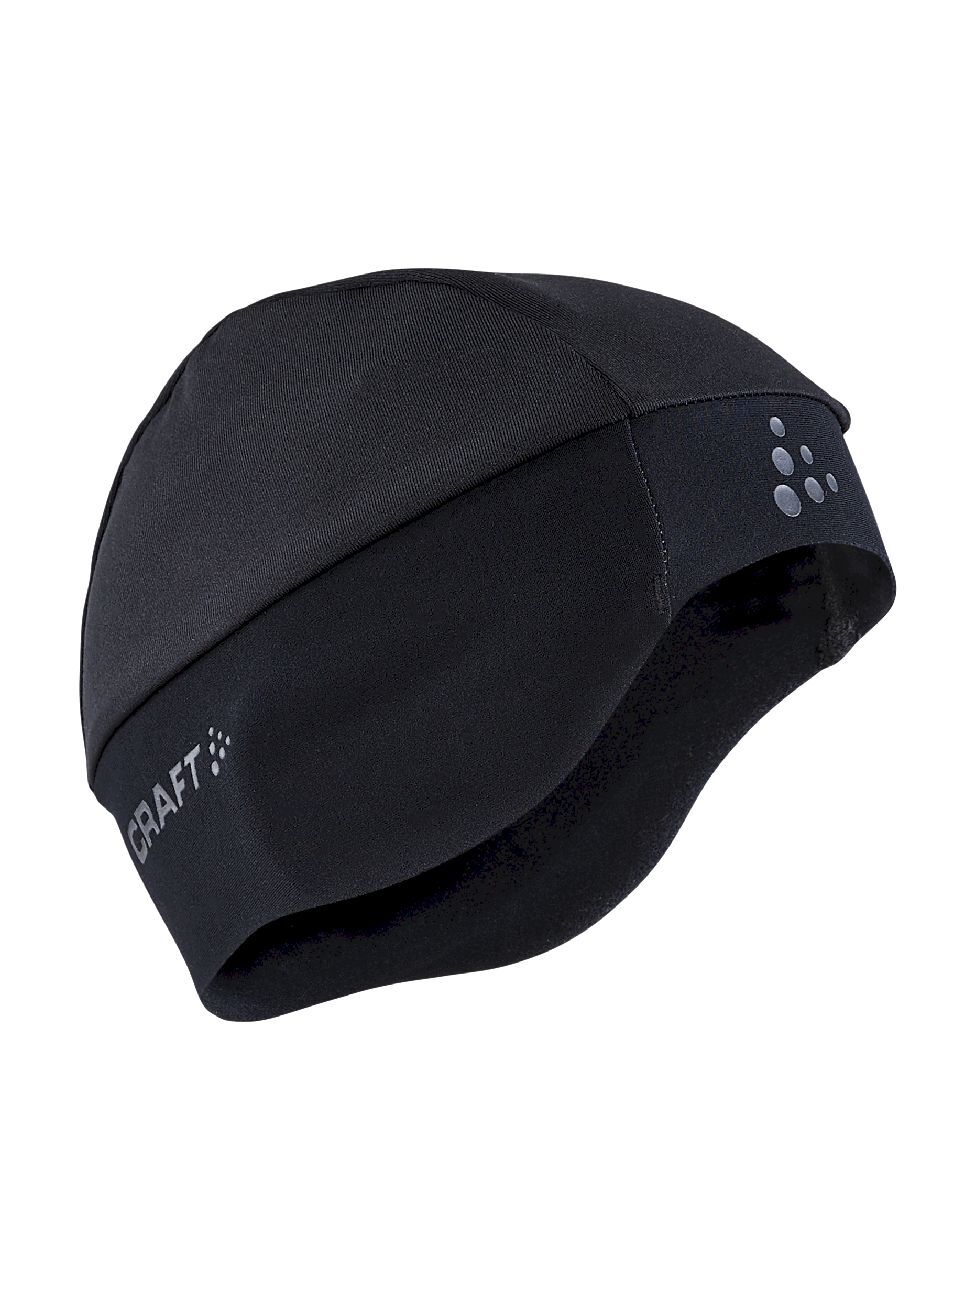 Craft ADV SubZ Thermal Hat - Pipo